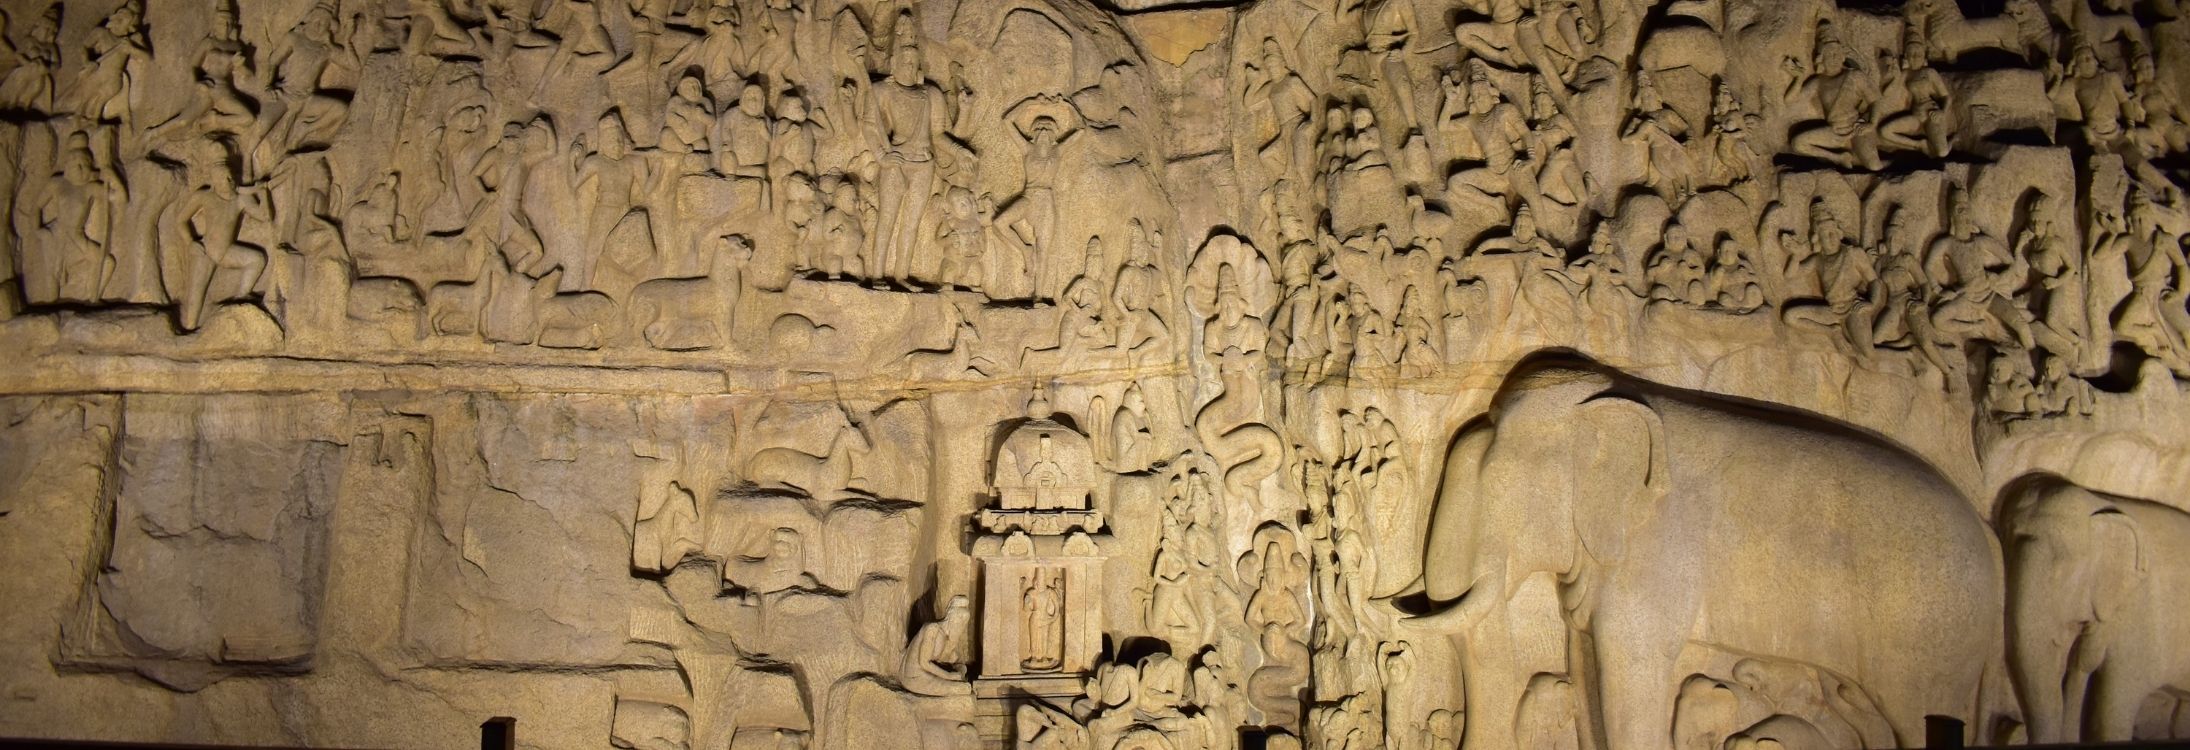 Pictorial description of the descent of the Ganges and Arjuna's Penance, Krishna Cave Temple